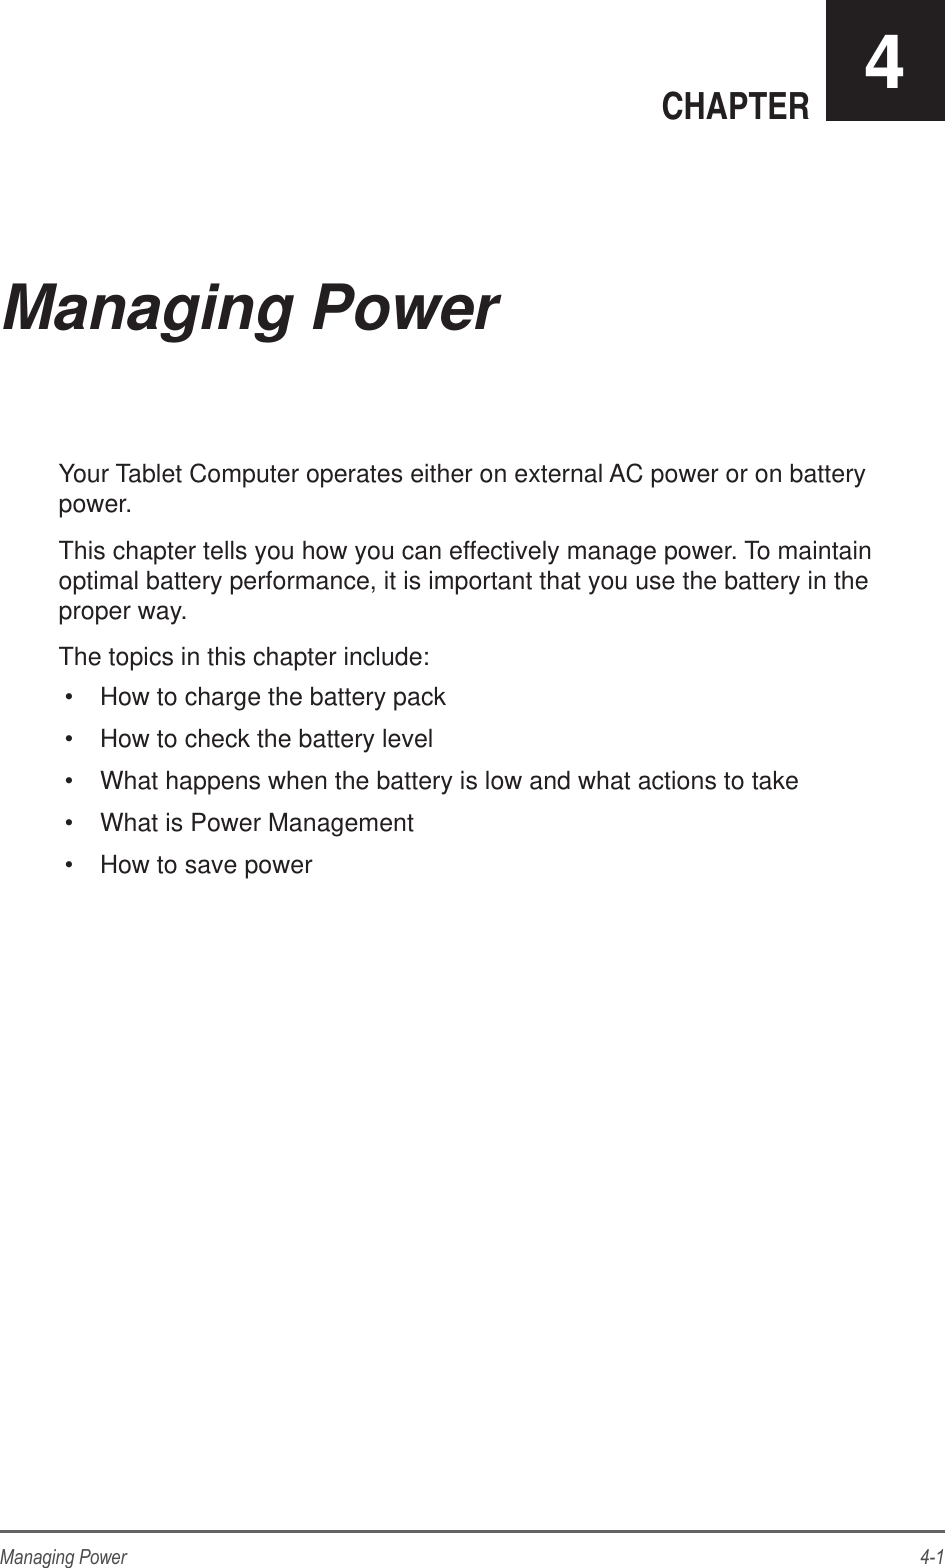 4-1Managing PowerCHAPTER 4Your Tablet Computer operates either on external AC power or on battery power. This chapter tells you how you can effectively manage power. To maintain optimal battery performance, it is important that you use the battery in the proper way.The topics in this chapter include:•  How to charge the battery pack•  How to check the battery level•  What happens when the battery is low and what actions to take•  What is Power Management•  How to save powerManaging Power